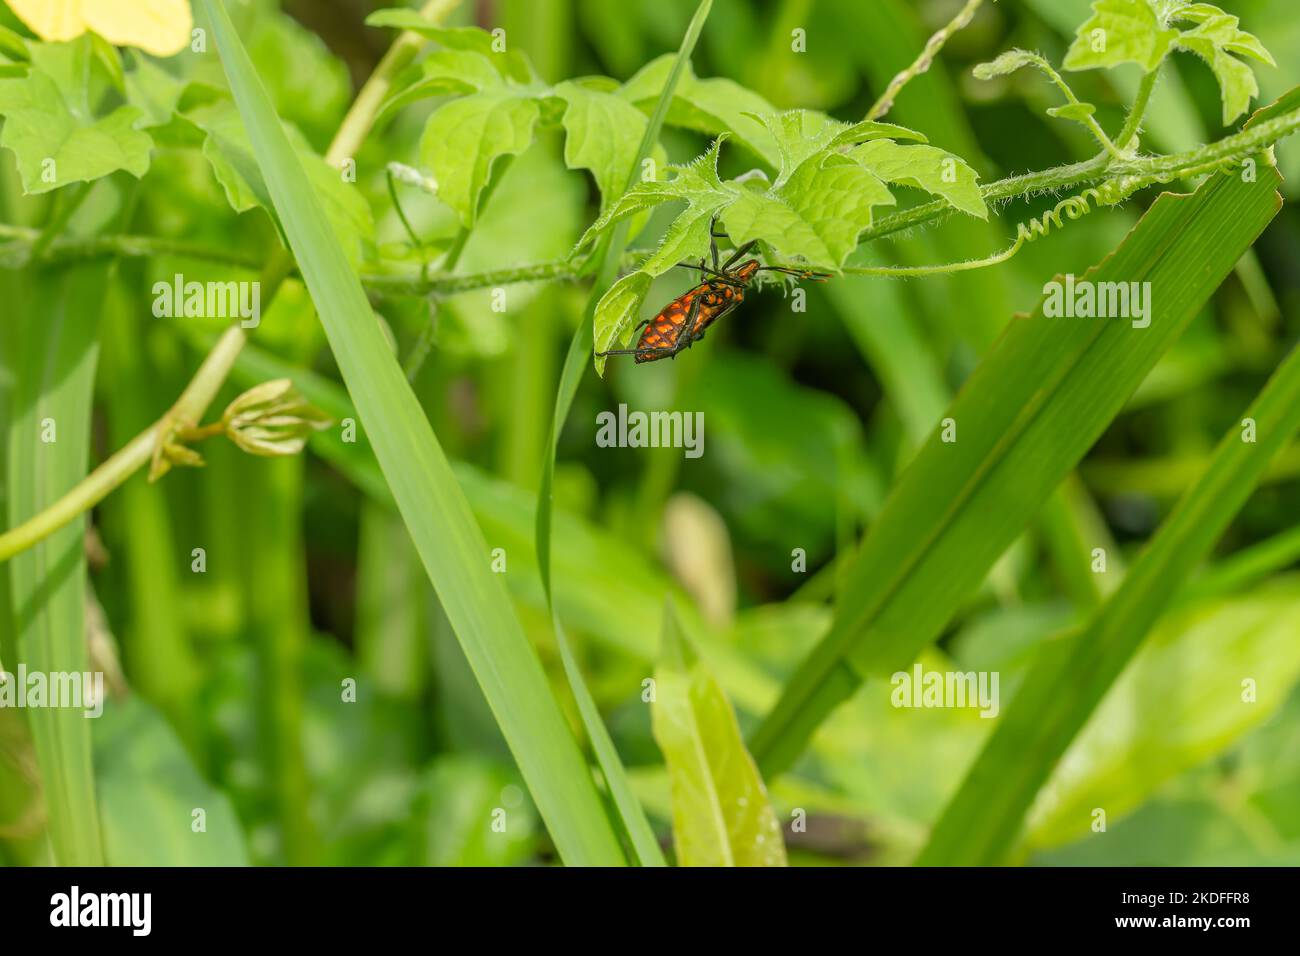 A pest animal named Arilus cristatus who is hanging on the tip of a green leaf, has a blurry green foliage background Stock Photo